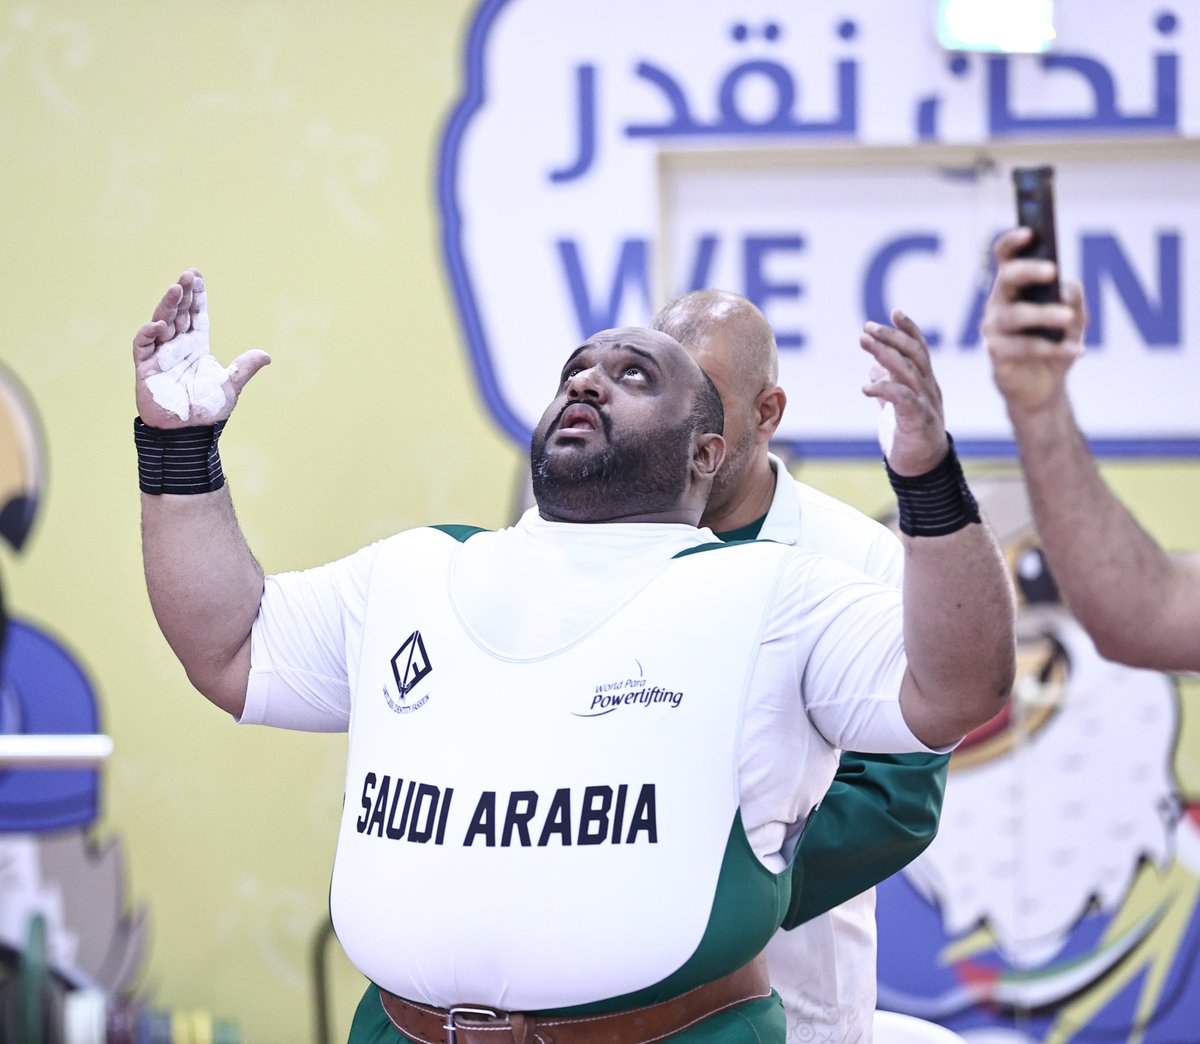 saudiolympic tweet picture